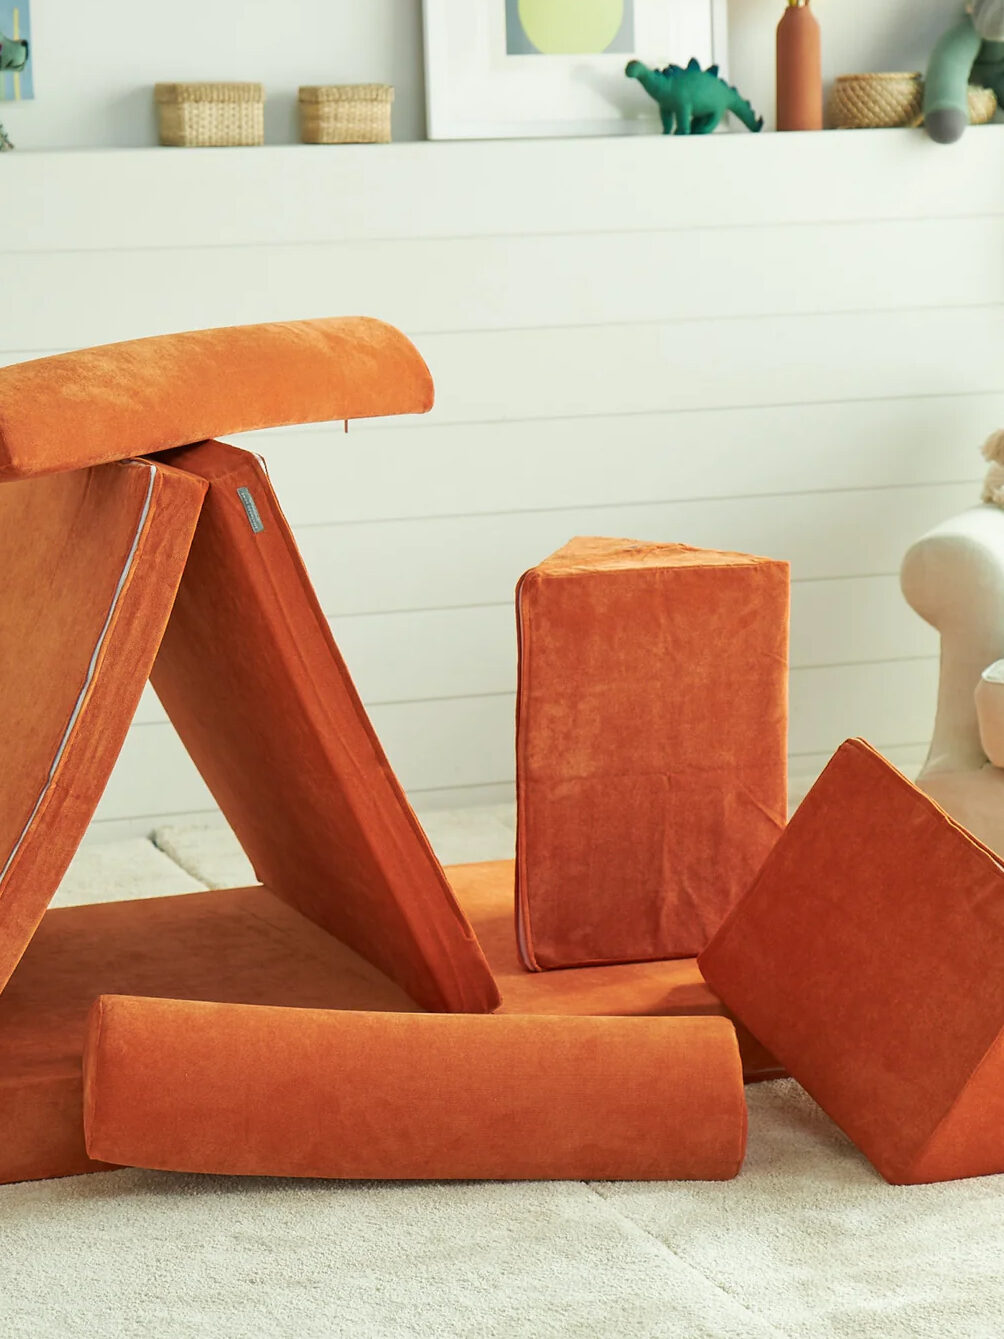 A pile of orange play couch cushions